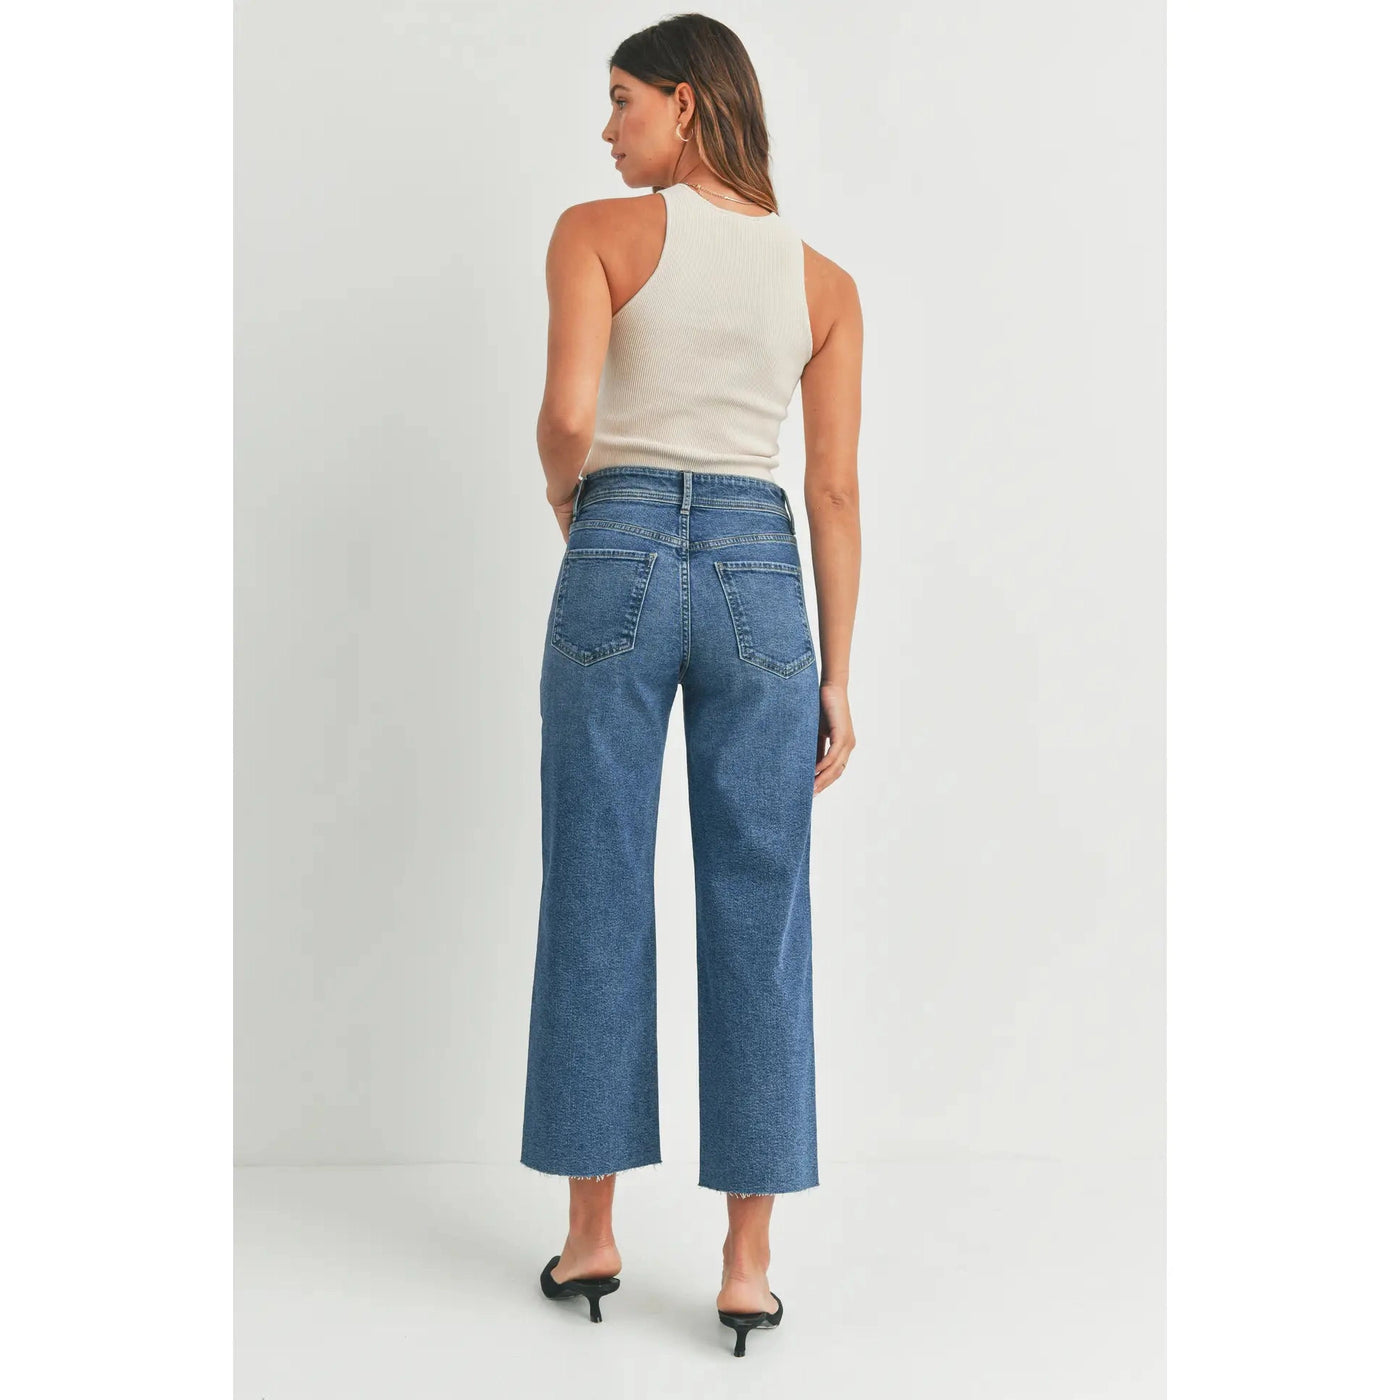 Melody HR Utility Jeans